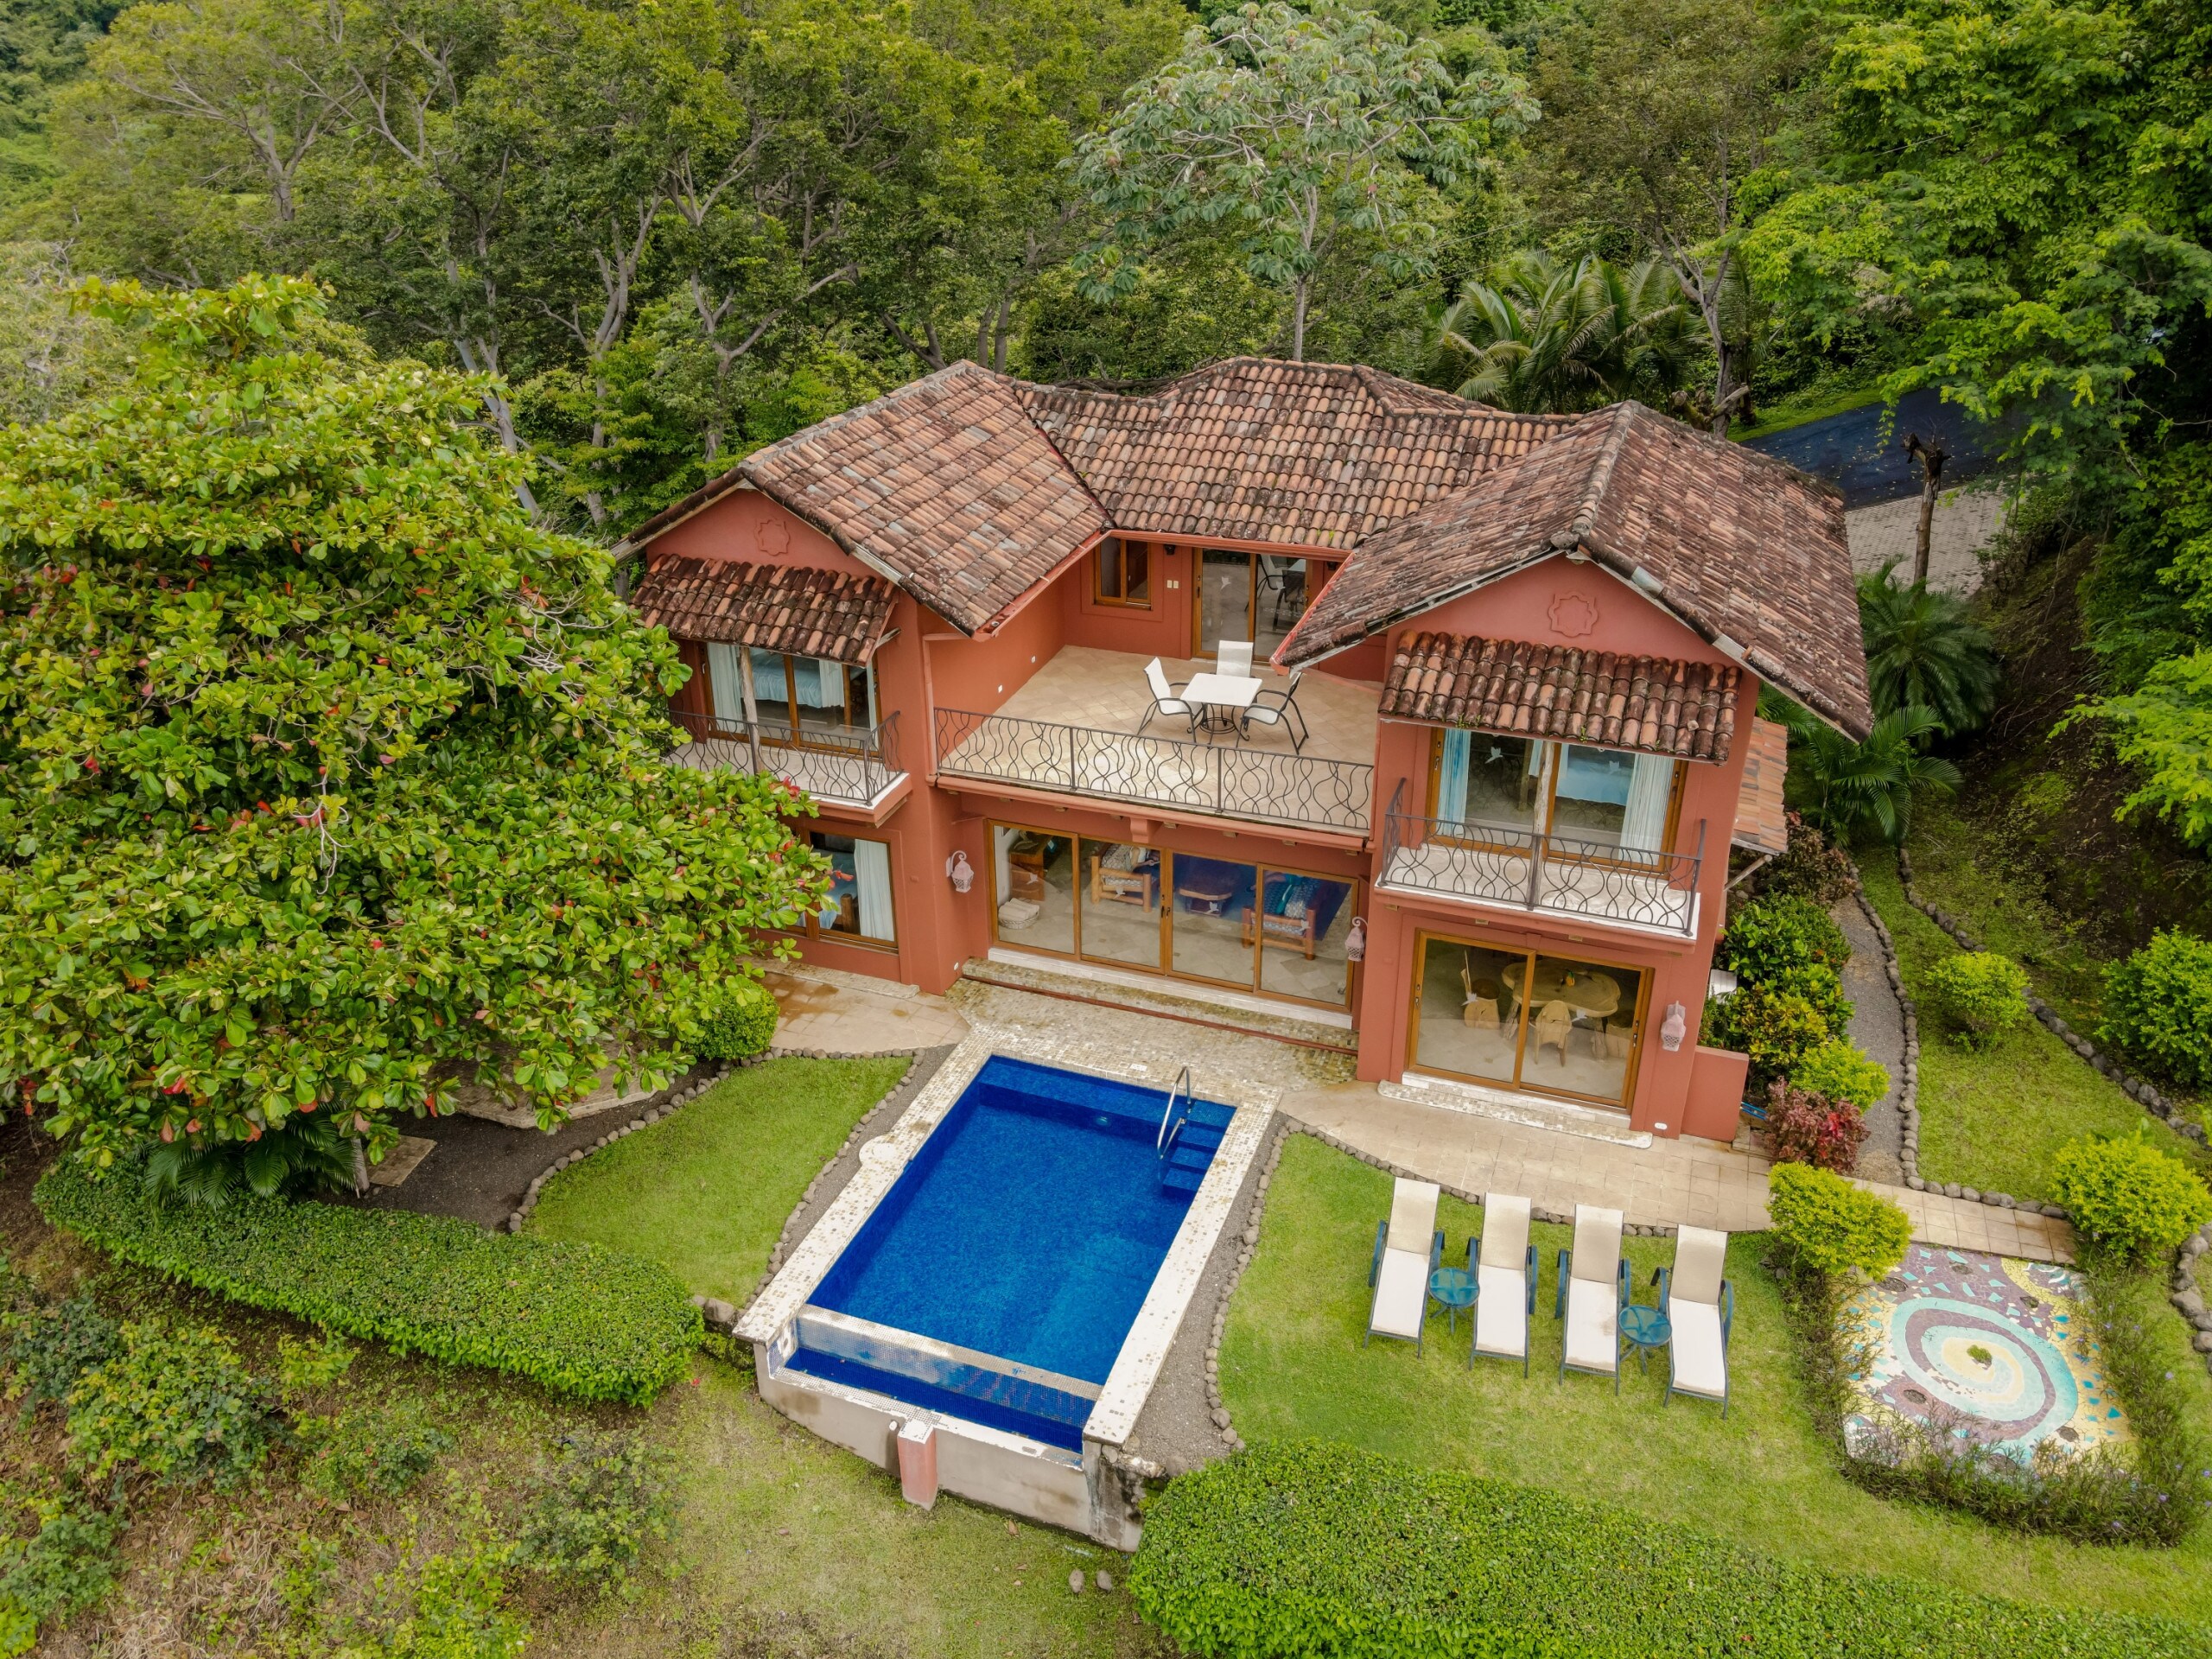 Property Image 1 - Bouganvilla, charming, private, and rustic-style 3 bedroom villa in the middle of nature